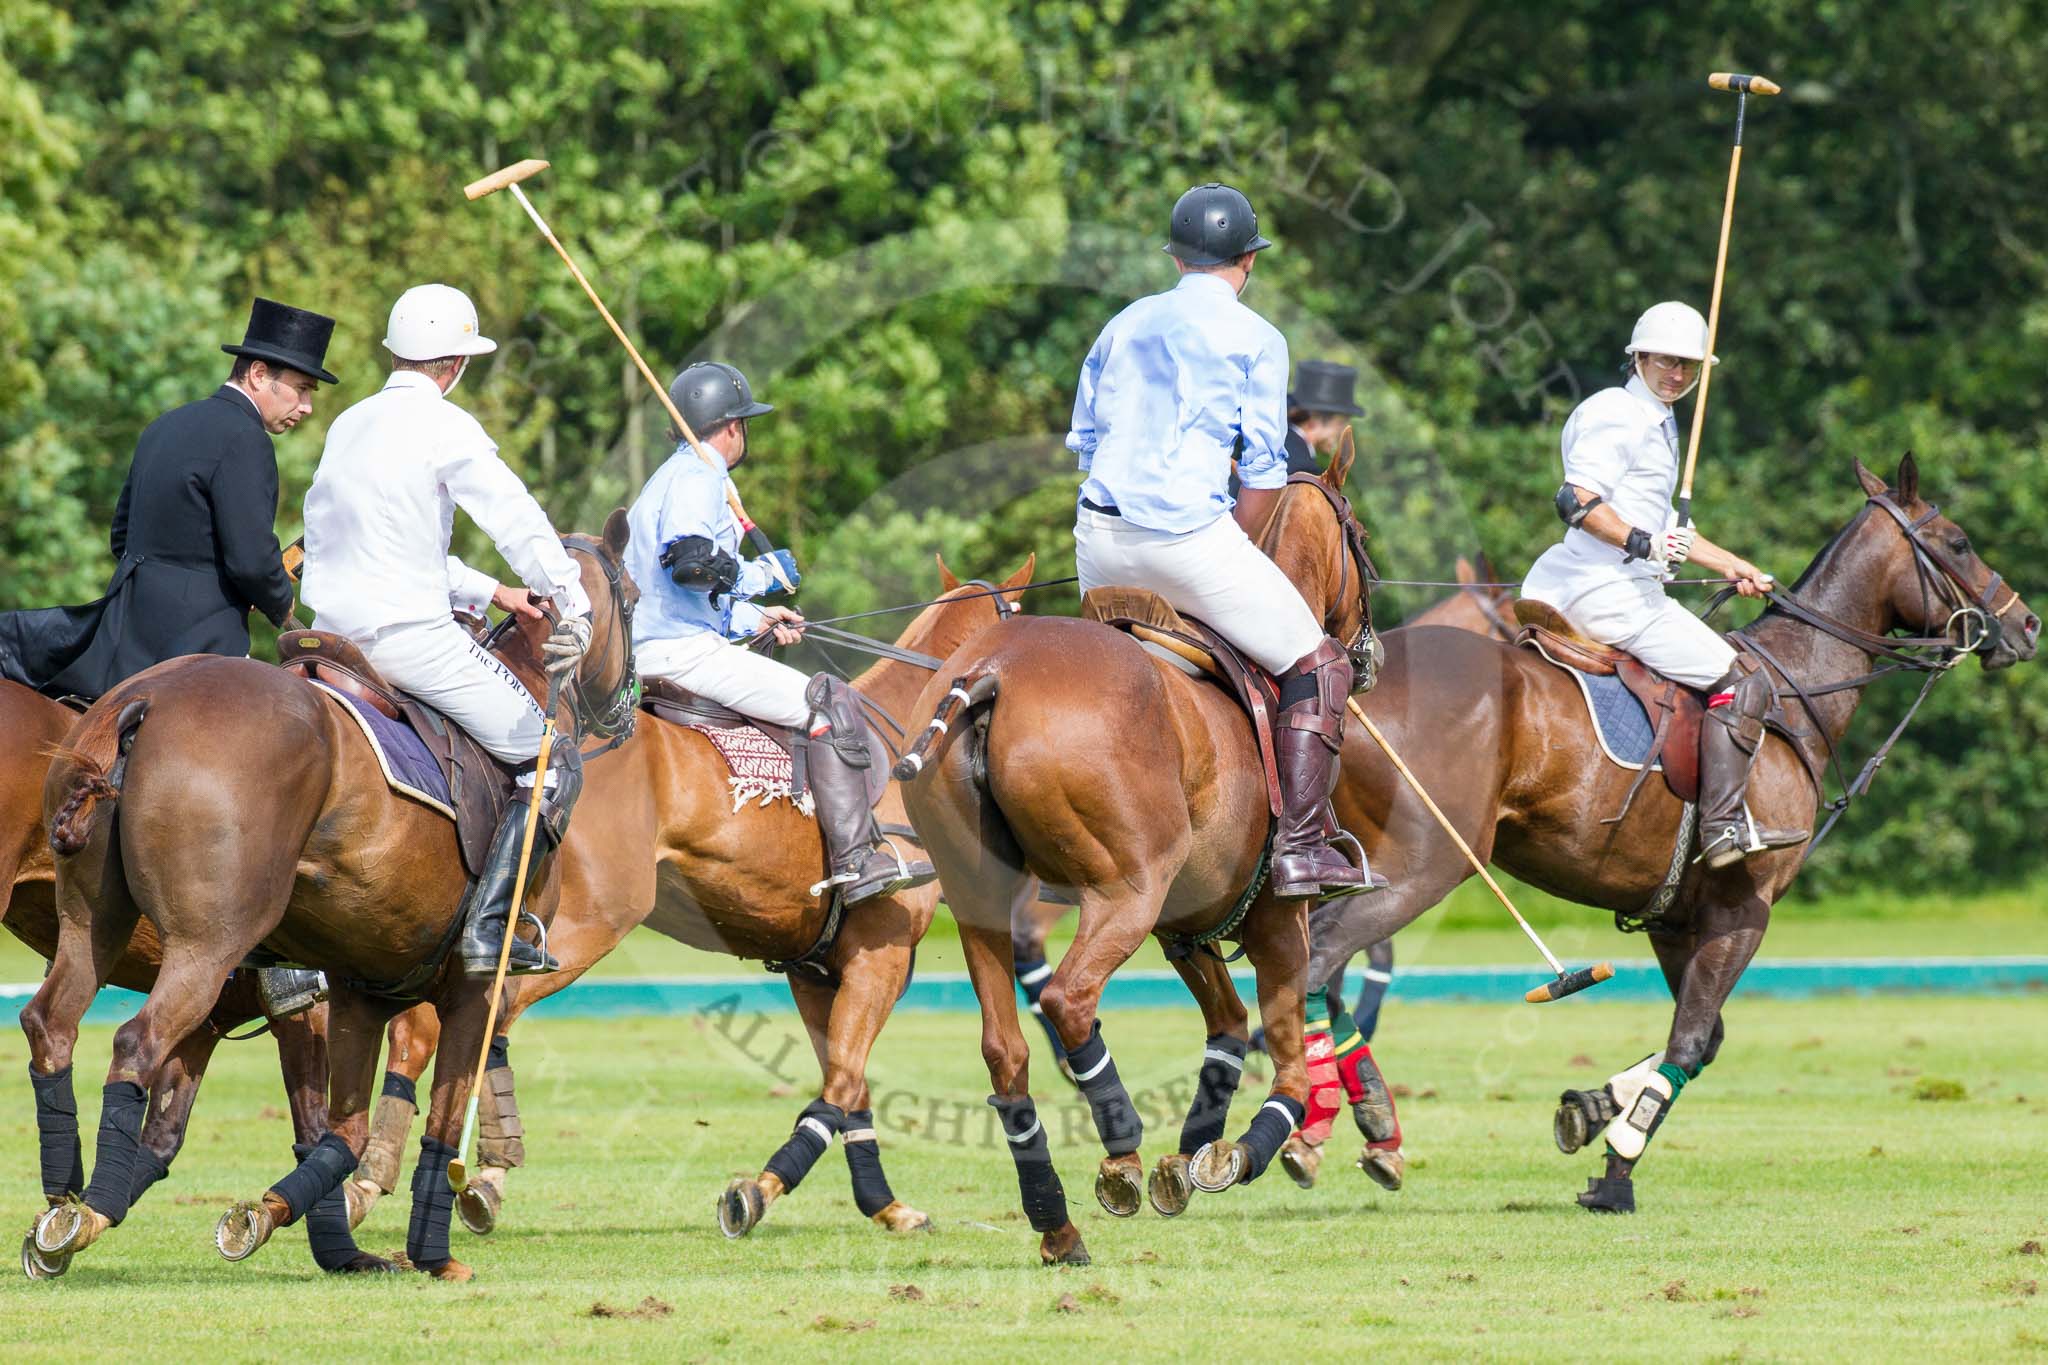 7th Heritage Polo Cup semi-finals: Back to centre..
Hurtwood Park Polo Club,
Ewhurst Green,
Surrey,
United Kingdom,
on 04 August 2012 at 16:13, image #316